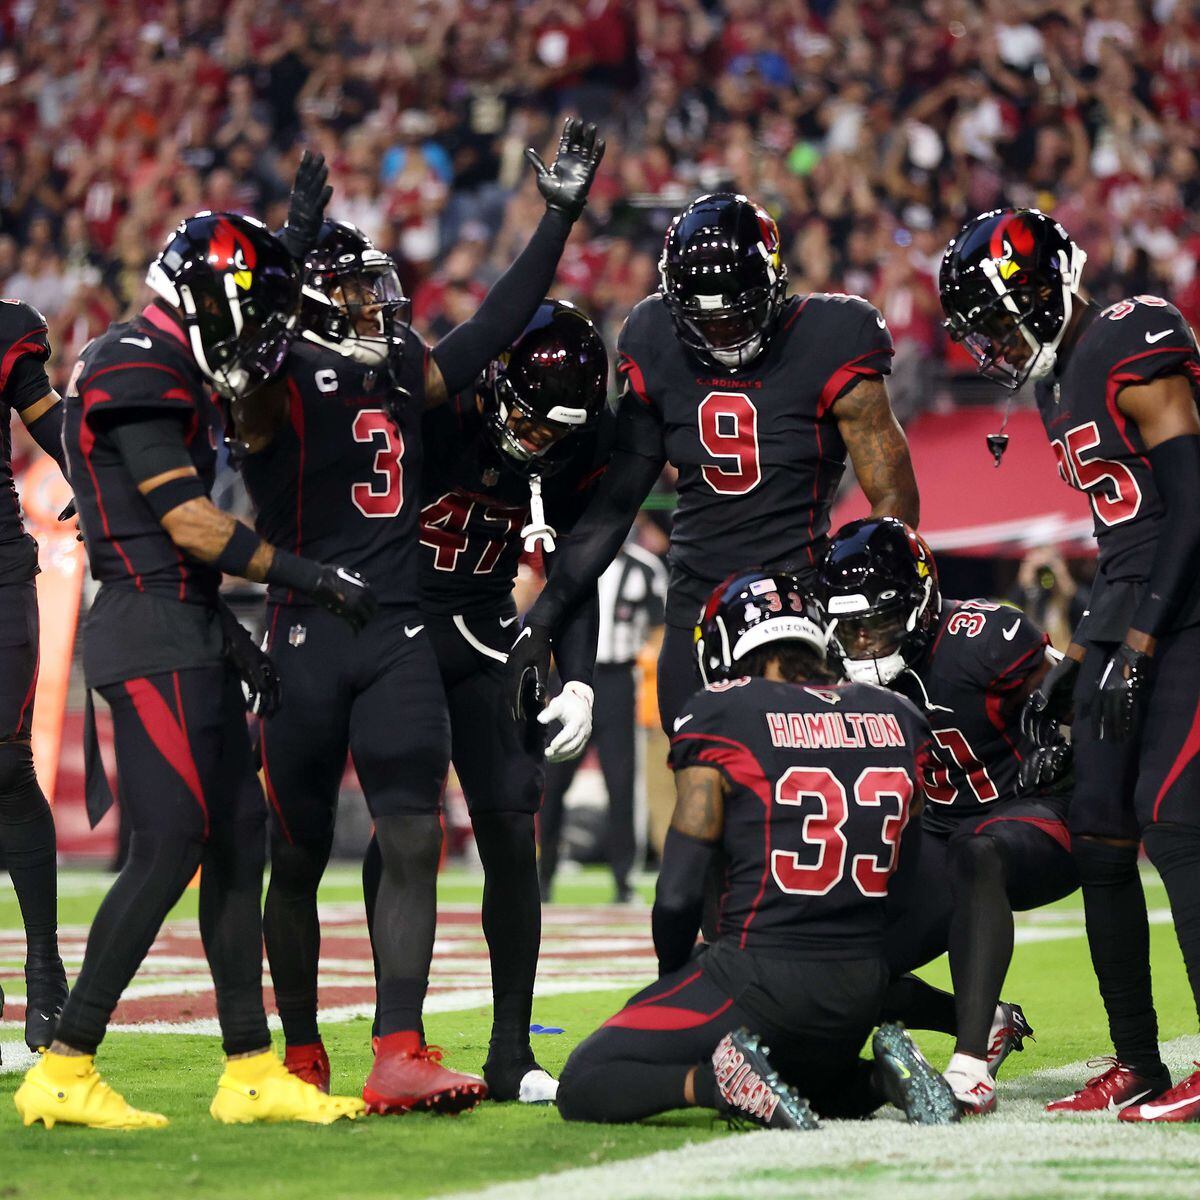 Arizona Cardinals' new uniforms earn disappointing reviews in NFL